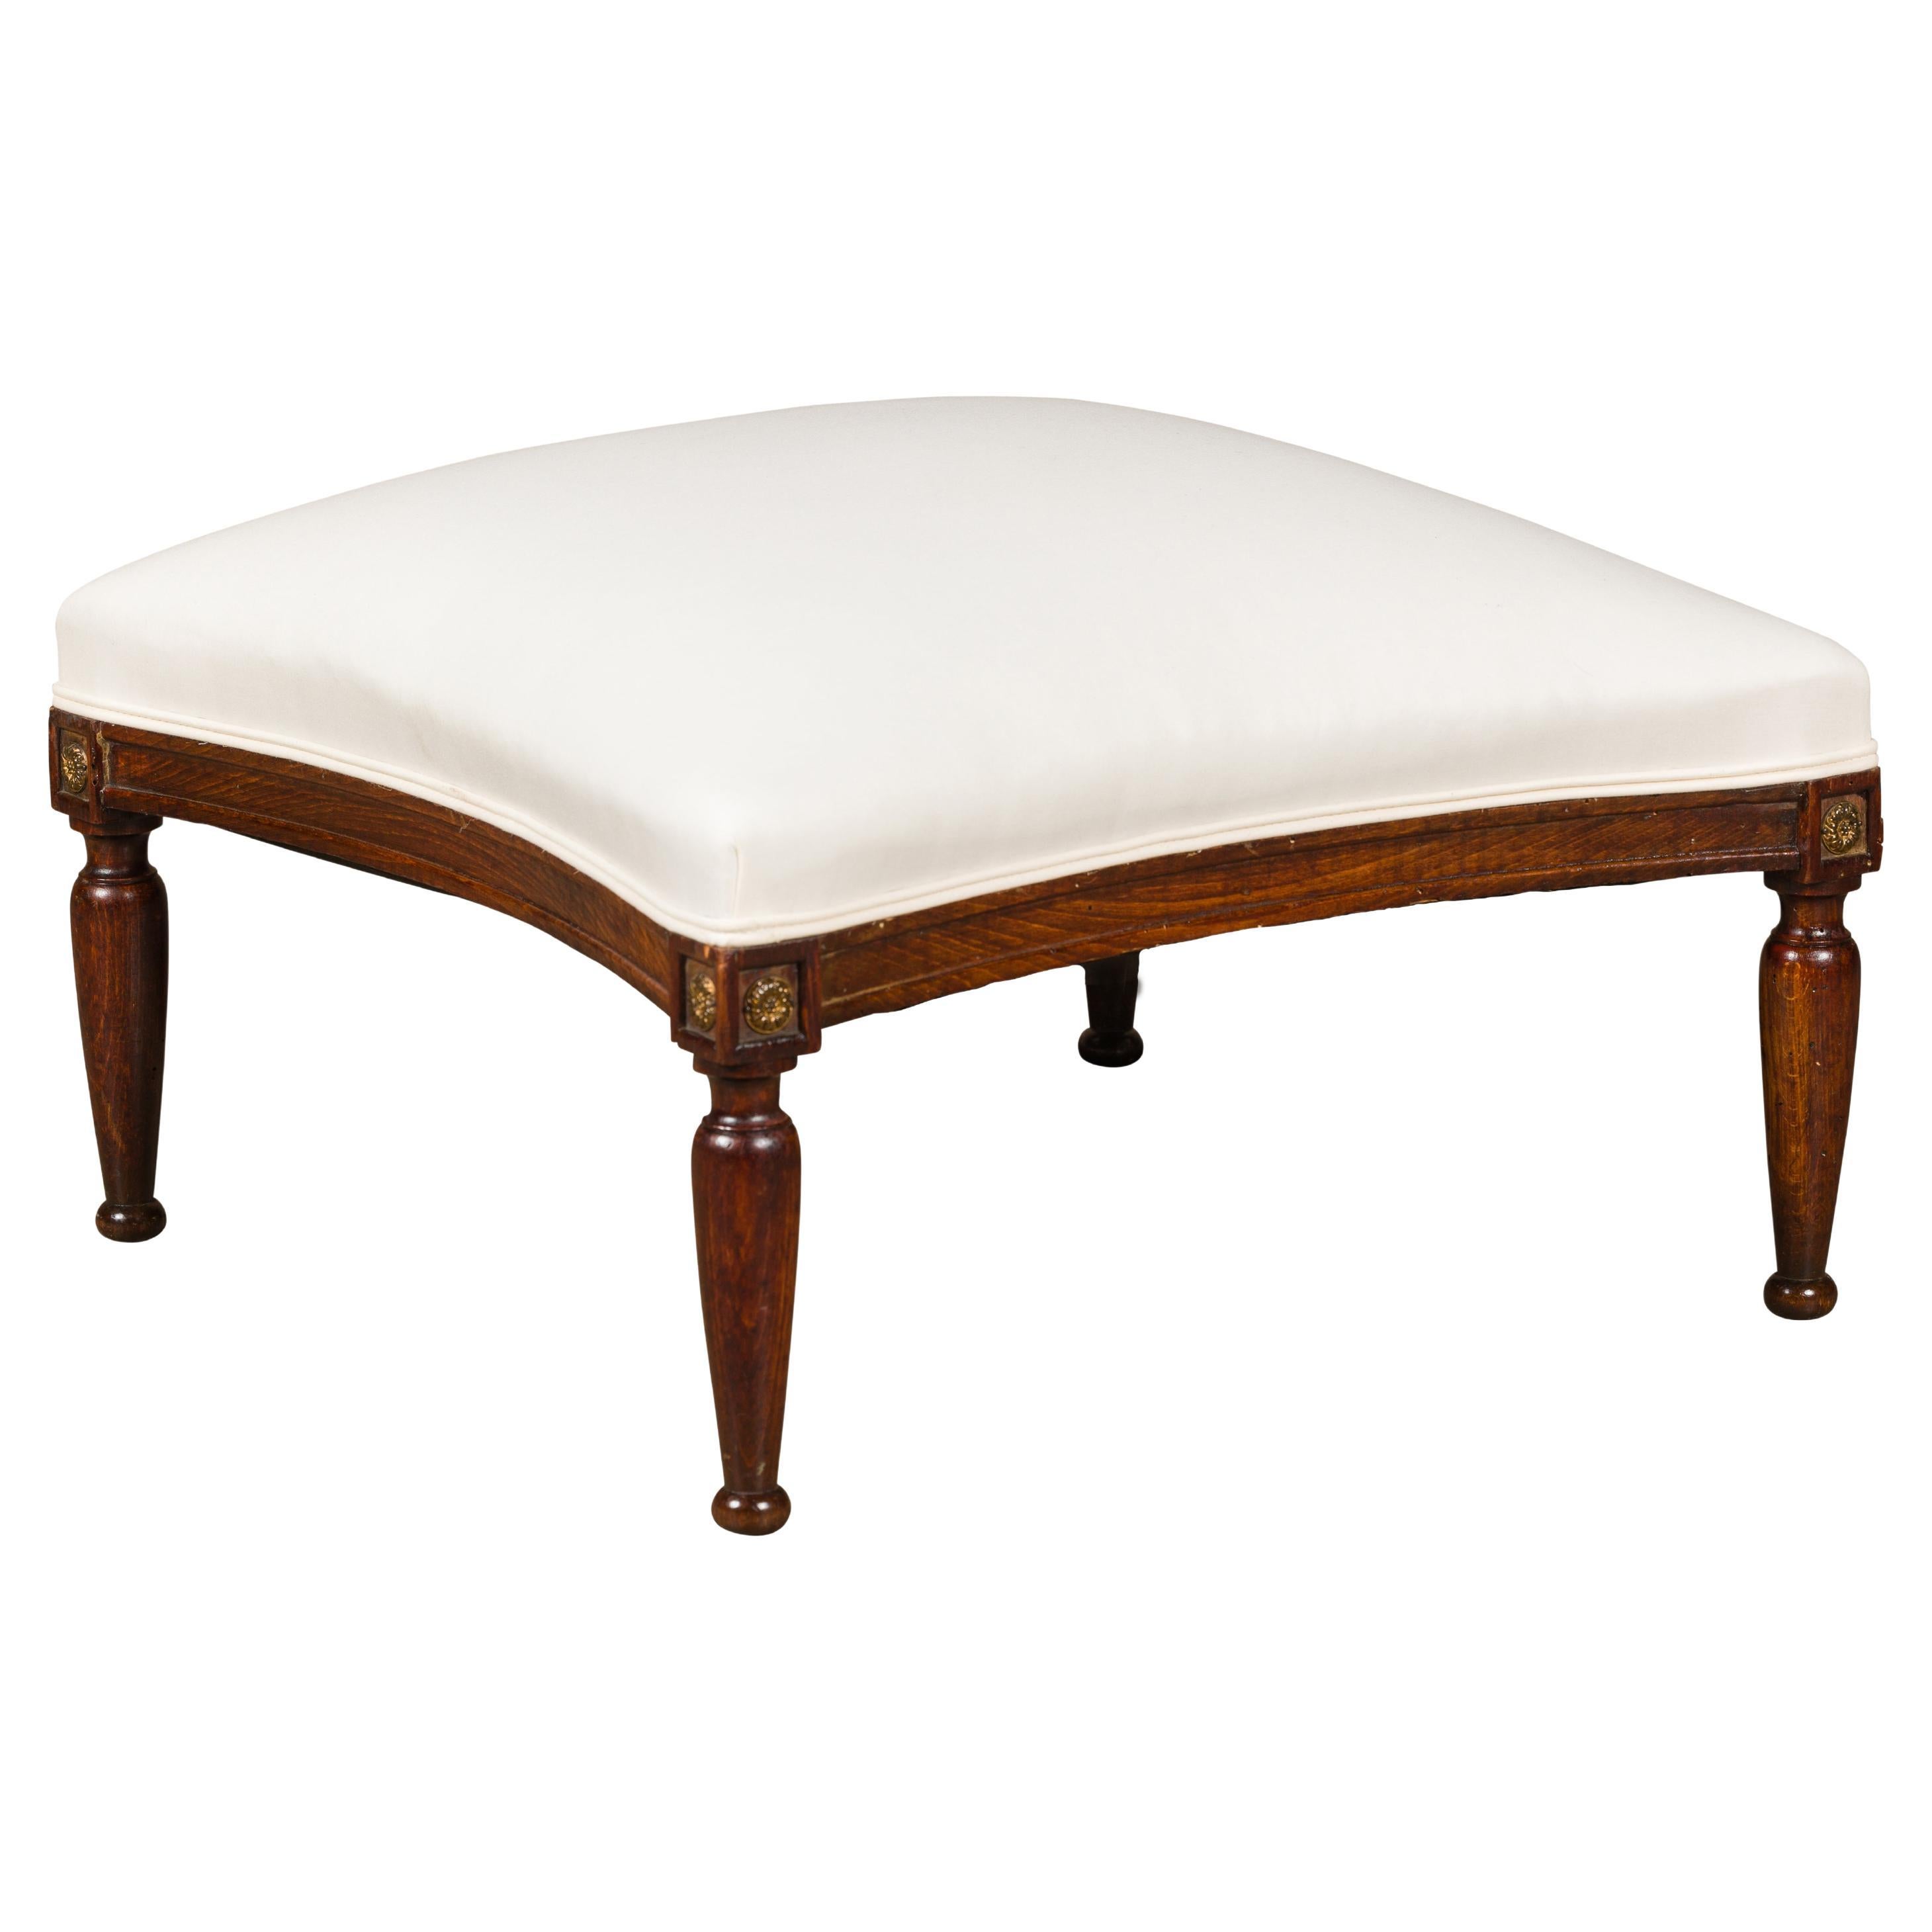 French Turn of the Century Ottoman with Giltwood Rosettes and Upholstery, 1900s For Sale